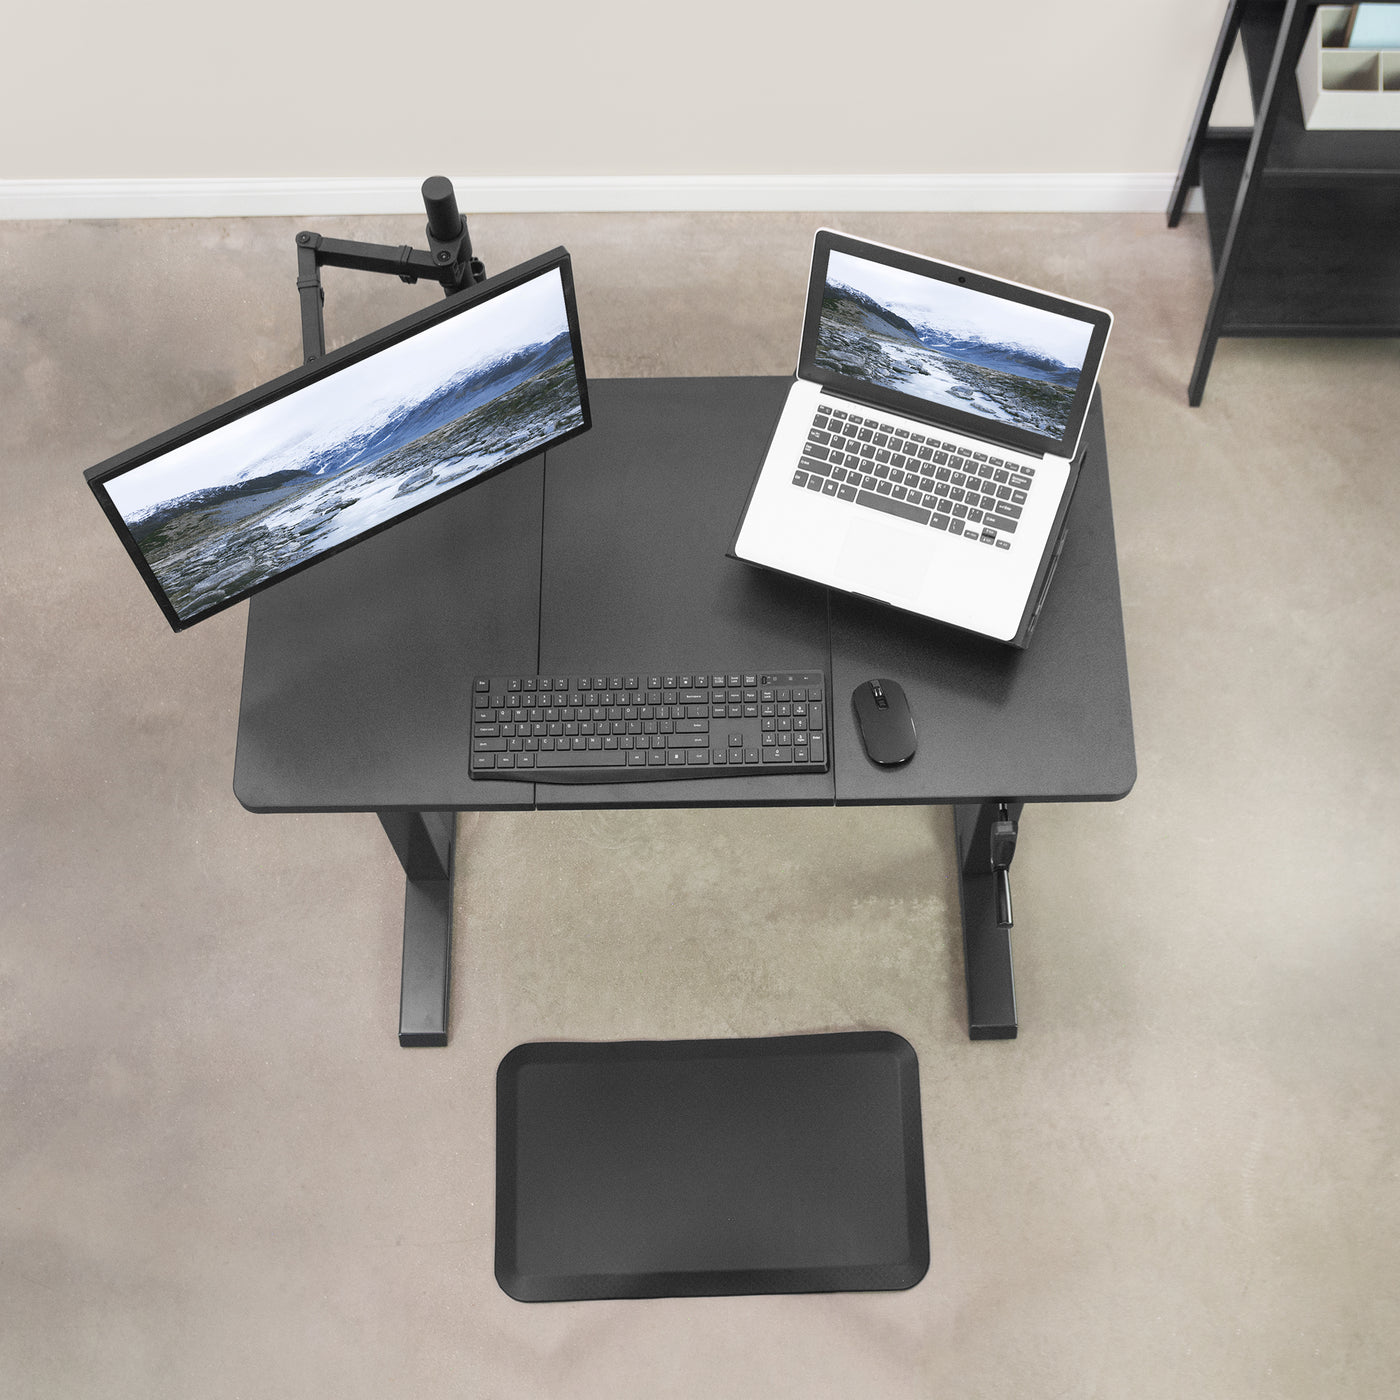 Large Anti-Fatigue Mat for Standing Desk - Sit-Stand Workstations, Display  Mounting and Mobility